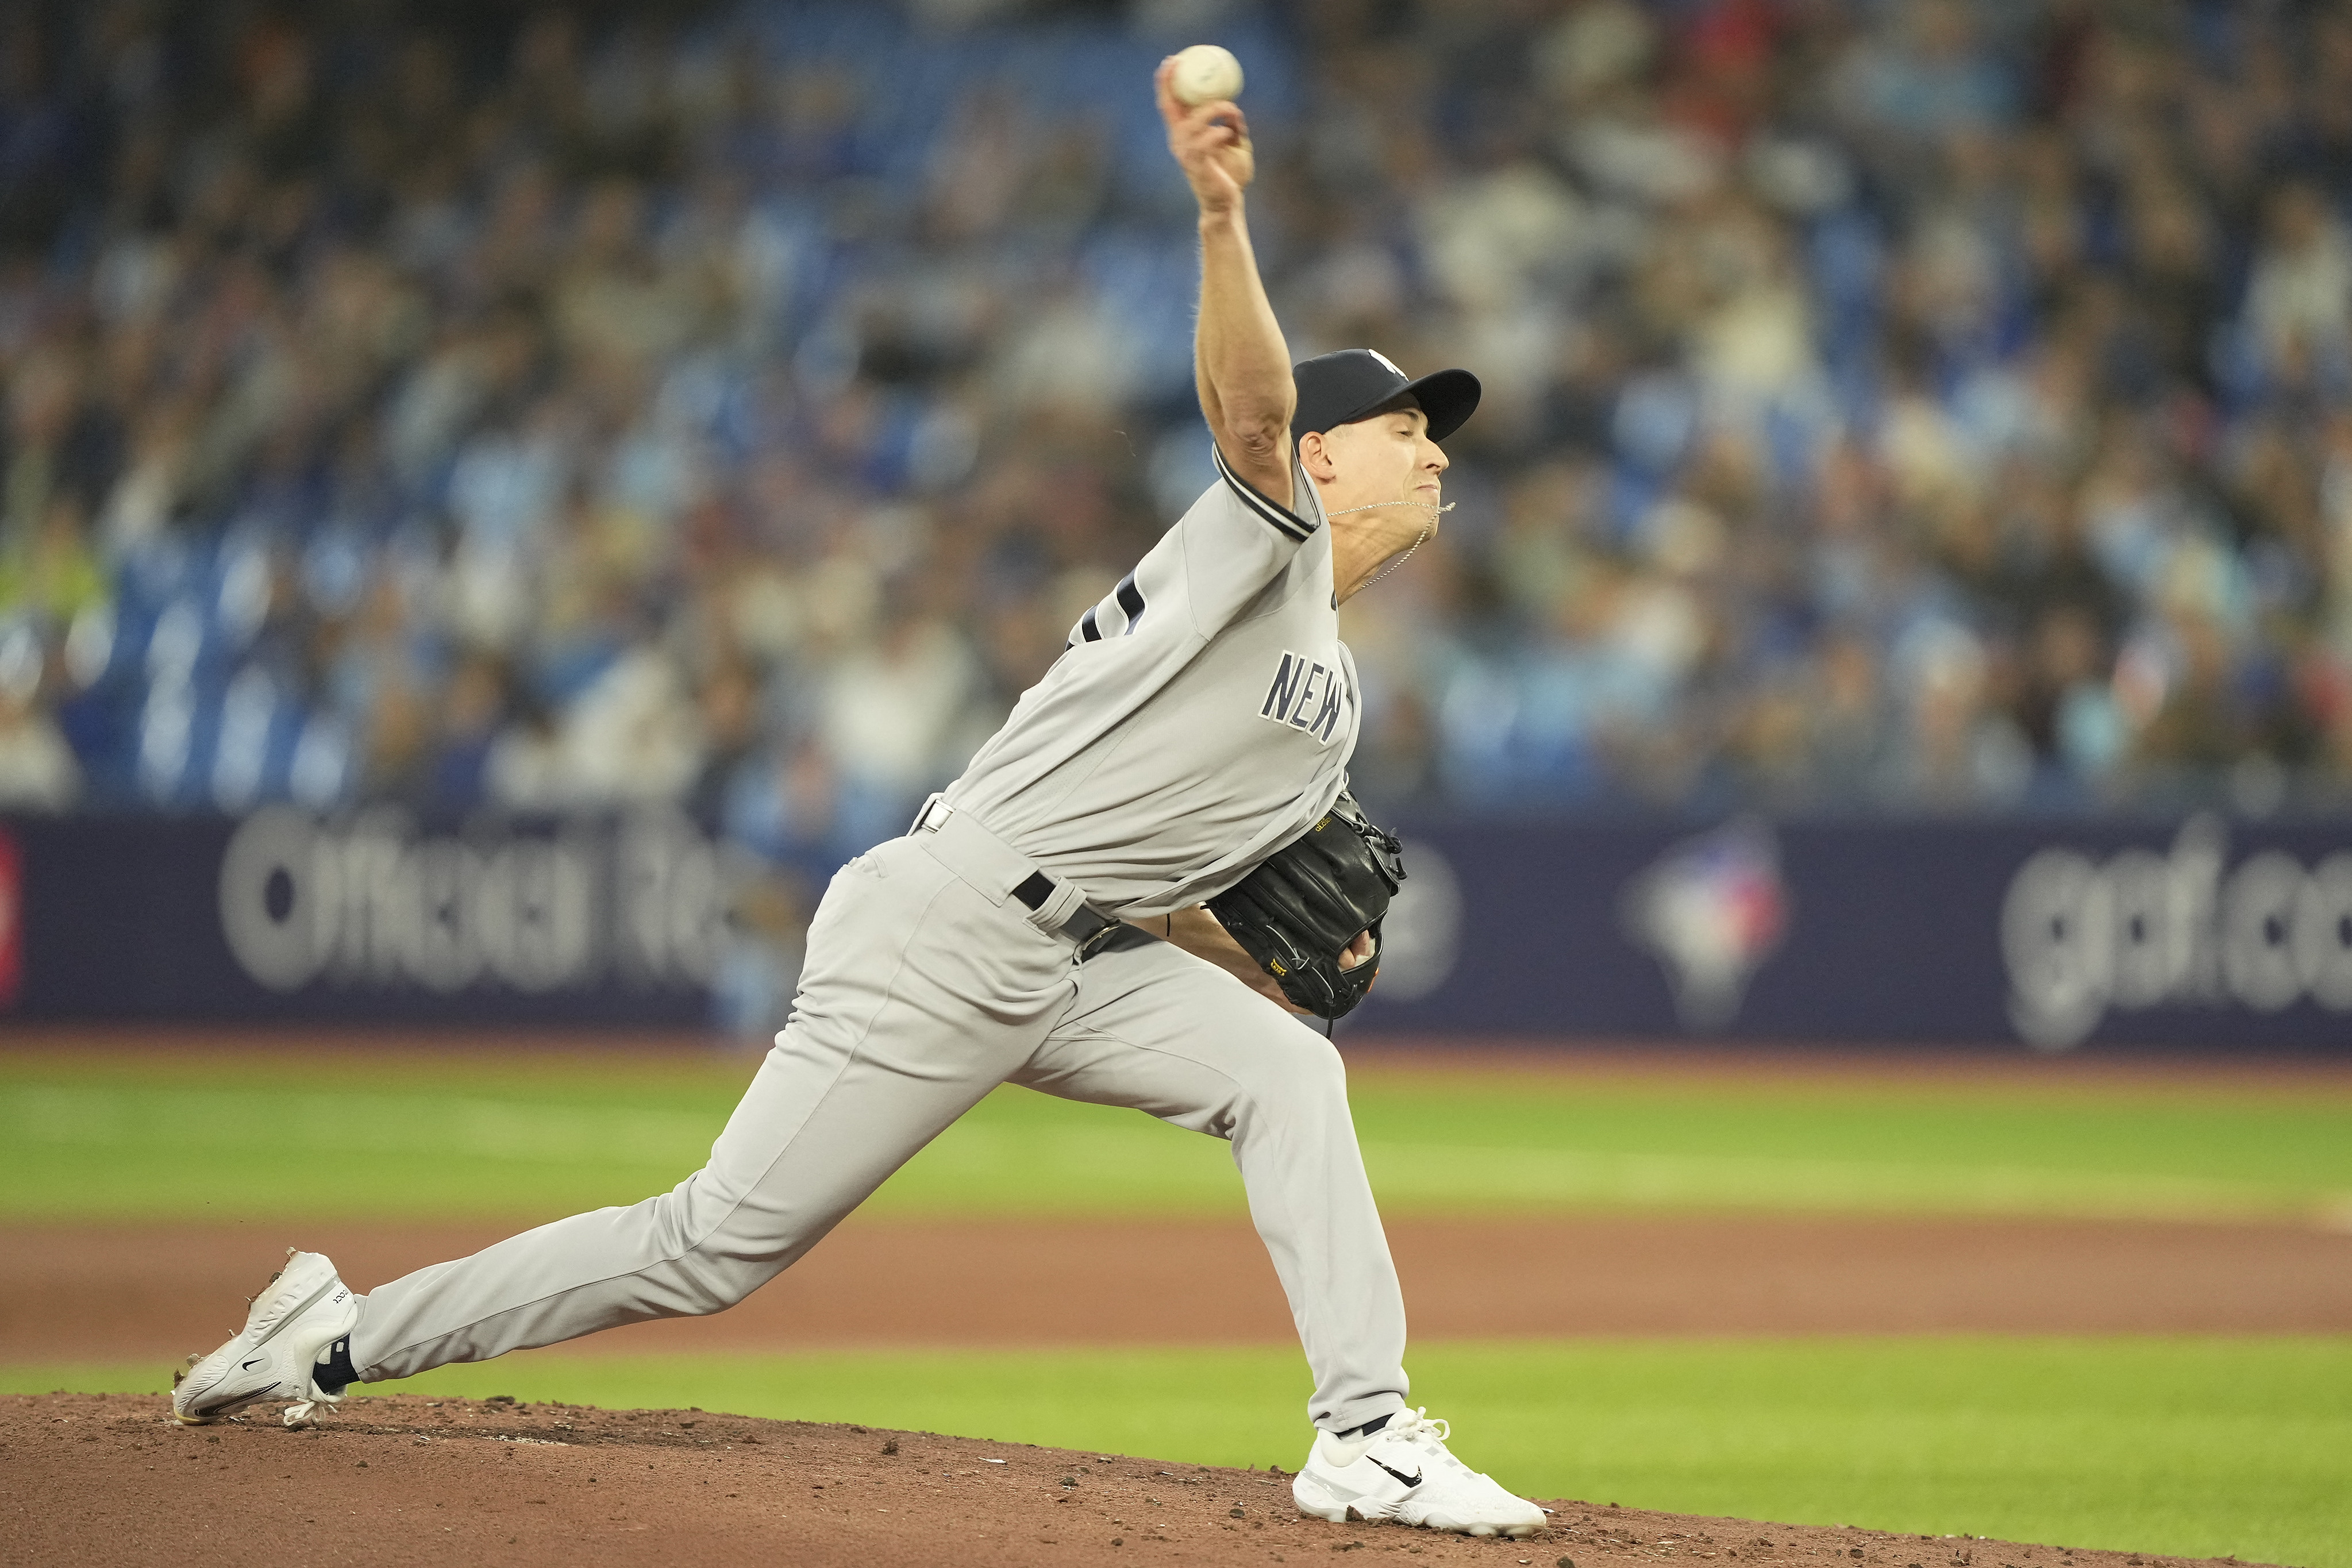 Yankees' stiffest competition in AL East may be Blue Jays